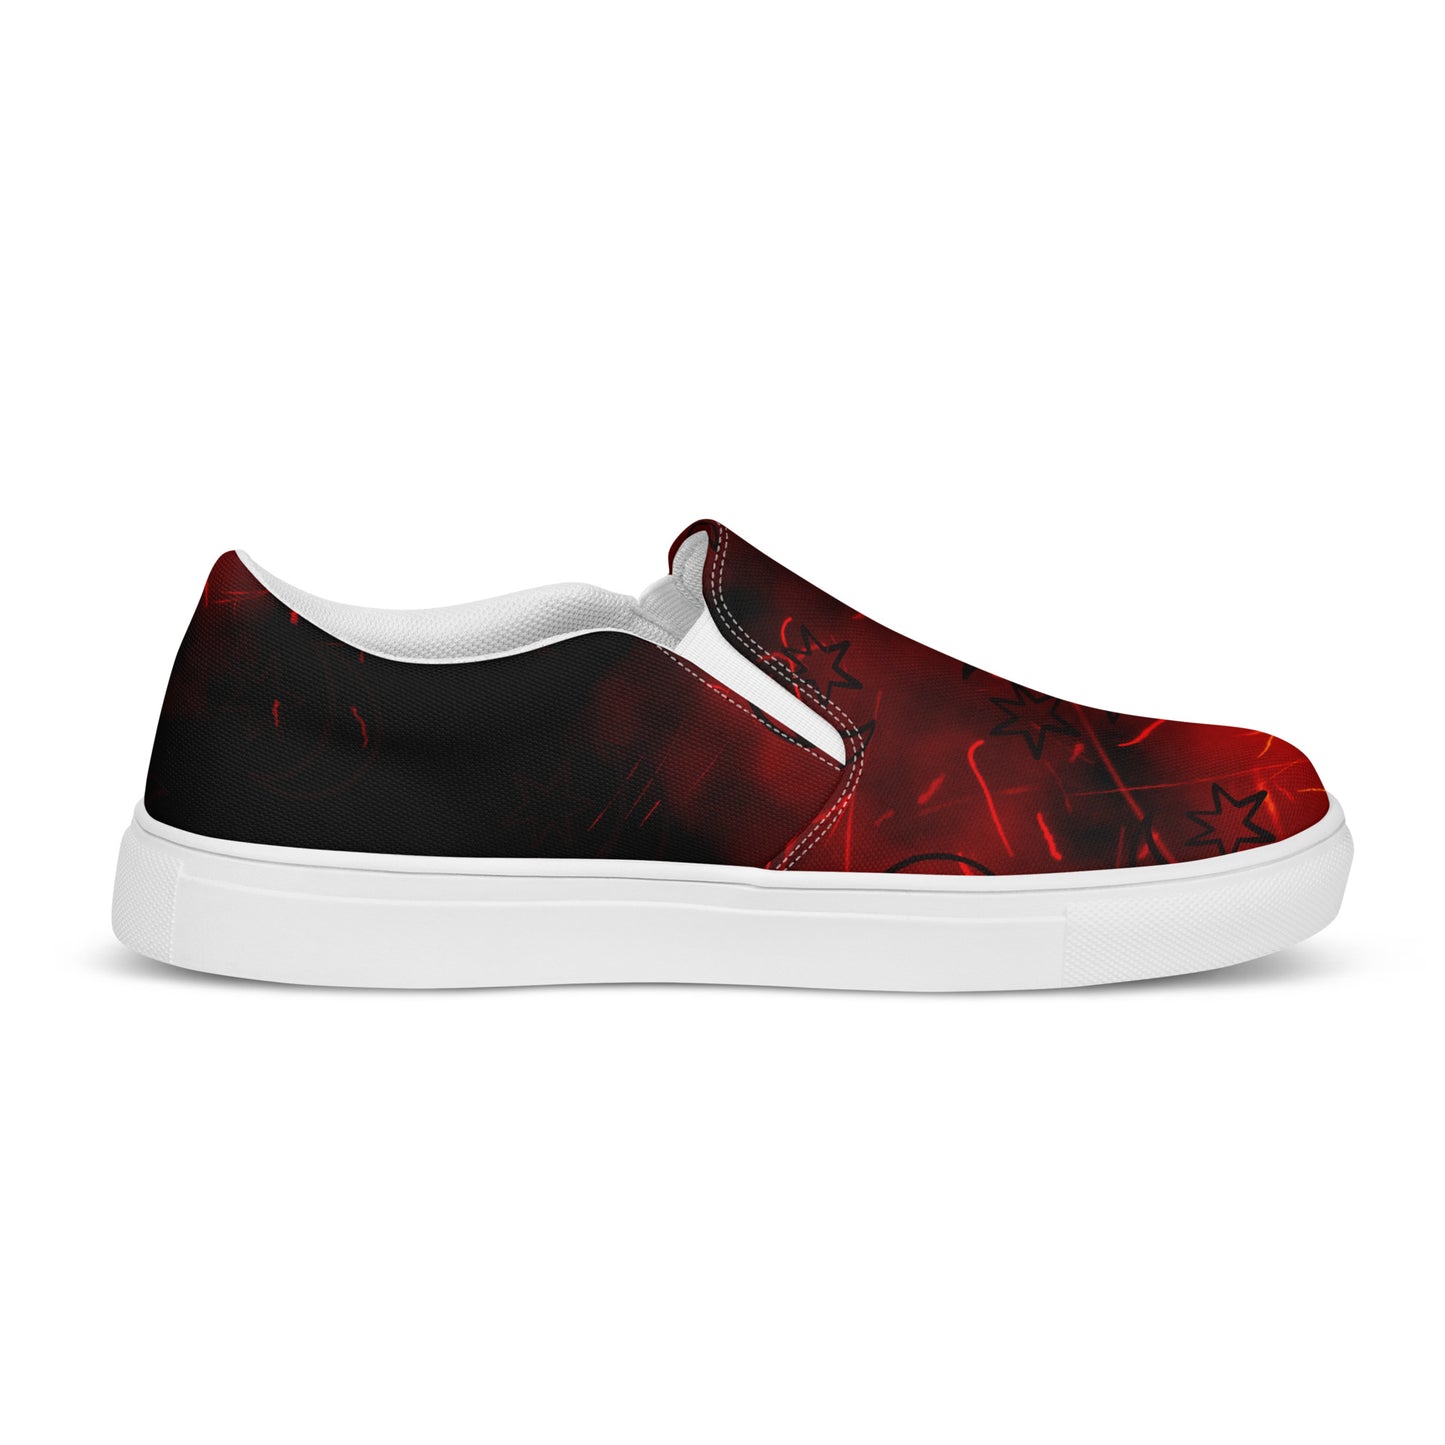 Red Moon Star Women’s Slip-on Canvas Shoes